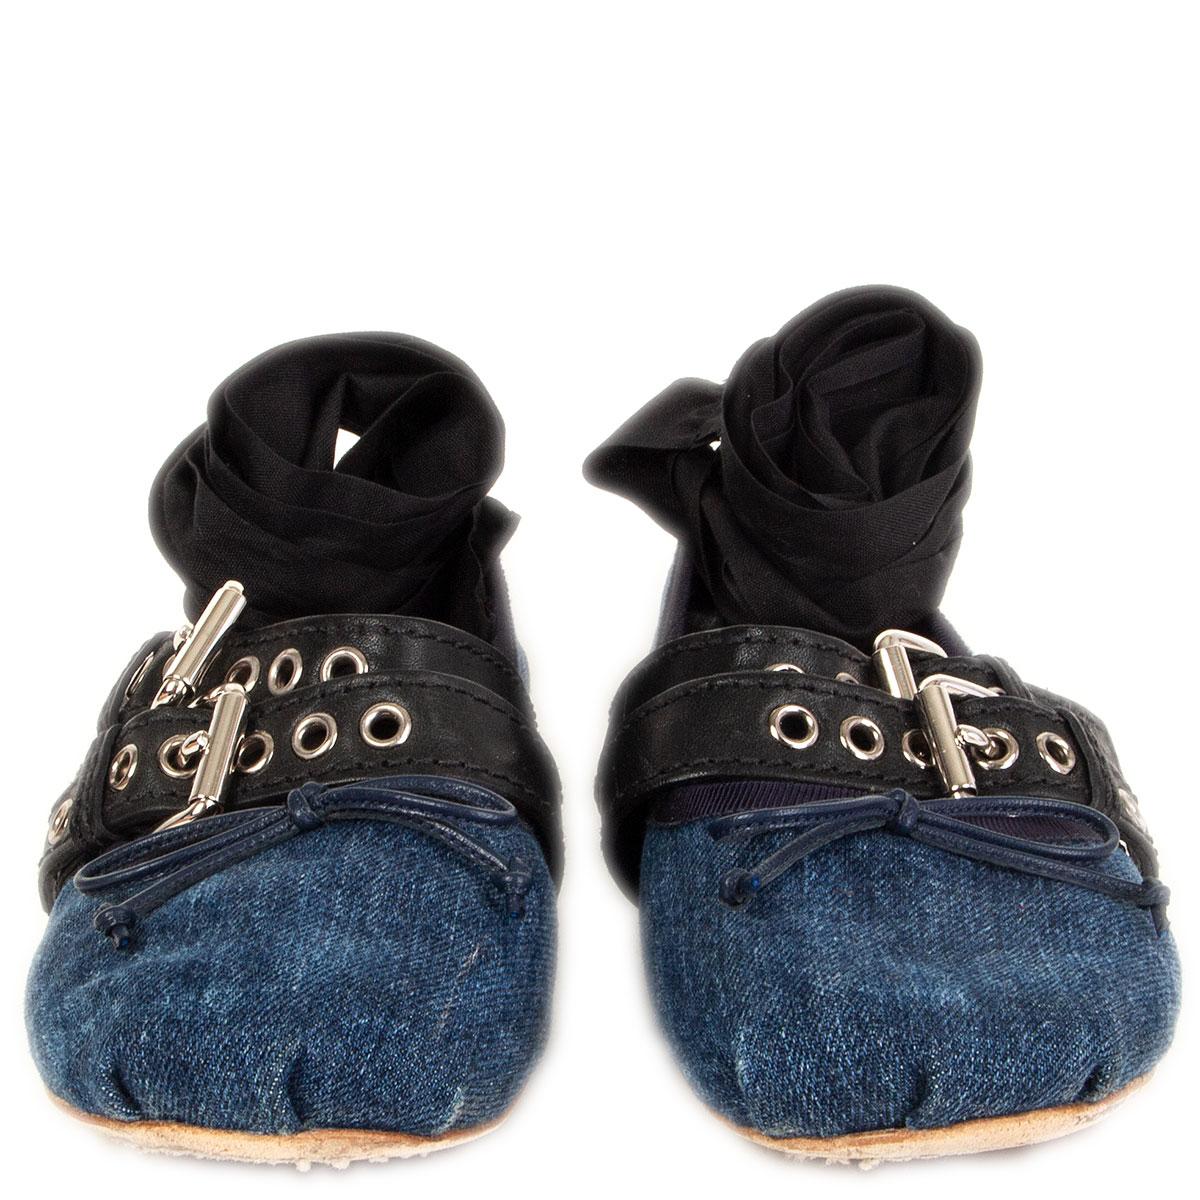 100% authentic Miu Miu ballet flats in indigo blue denim featuring black calfskin buckle closure with silver-tone hardware. Grograin trim and leather bow detail. Come with detachable ribbon belts in black canvas. Have been worn and are in excellent